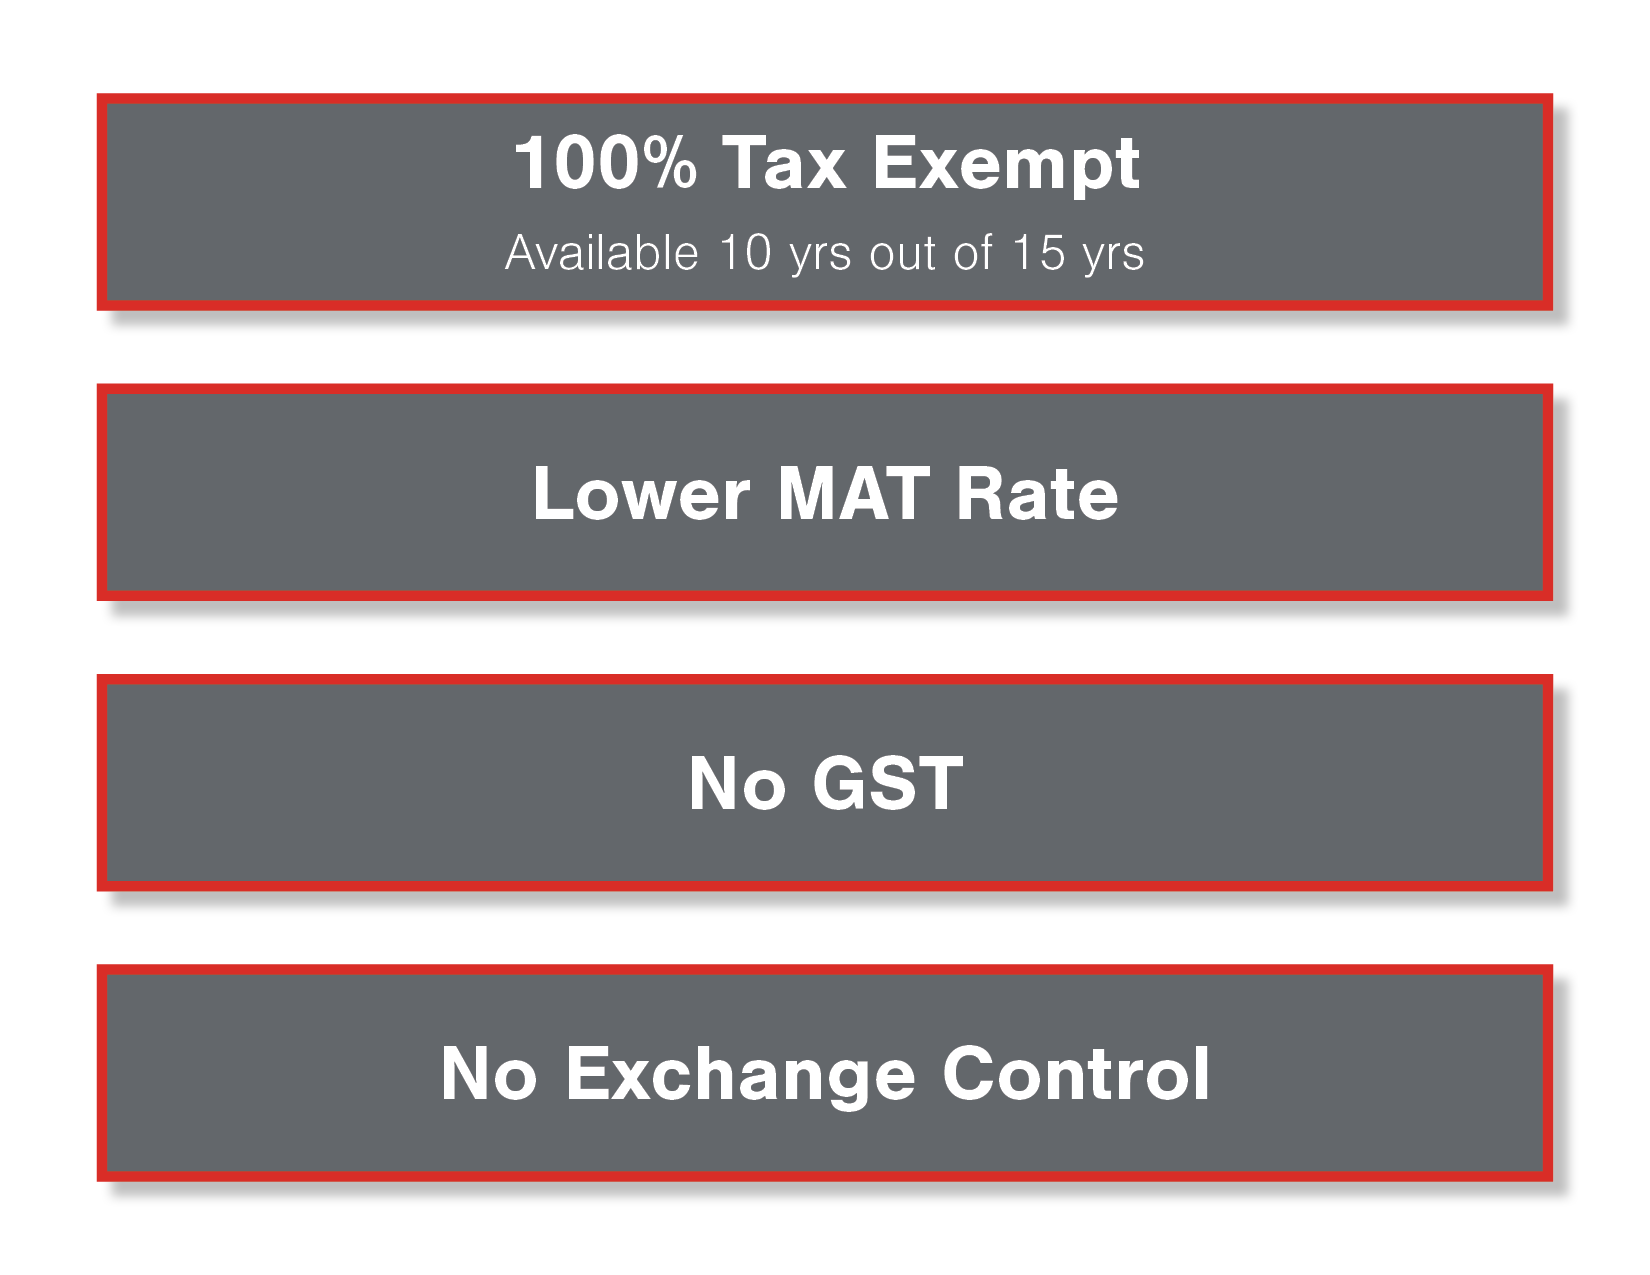 100% Tax Exempt (Available 10 yrs out of 15 yrs) > Lower MAT Rate > No GST > No Exchange Control